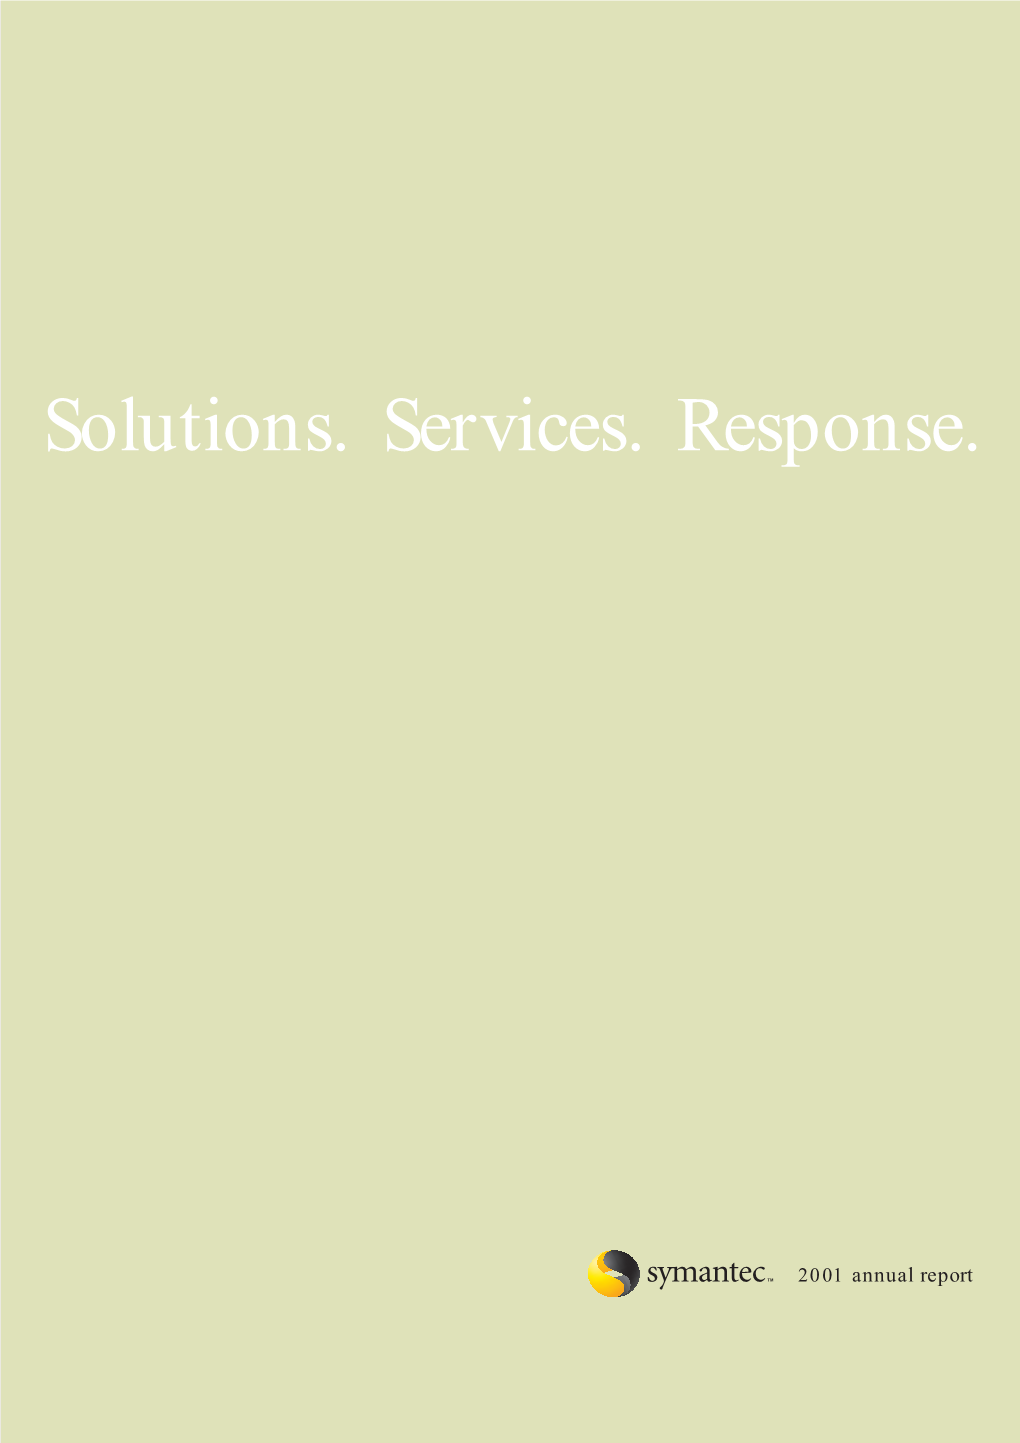 Solutions. Services. Response